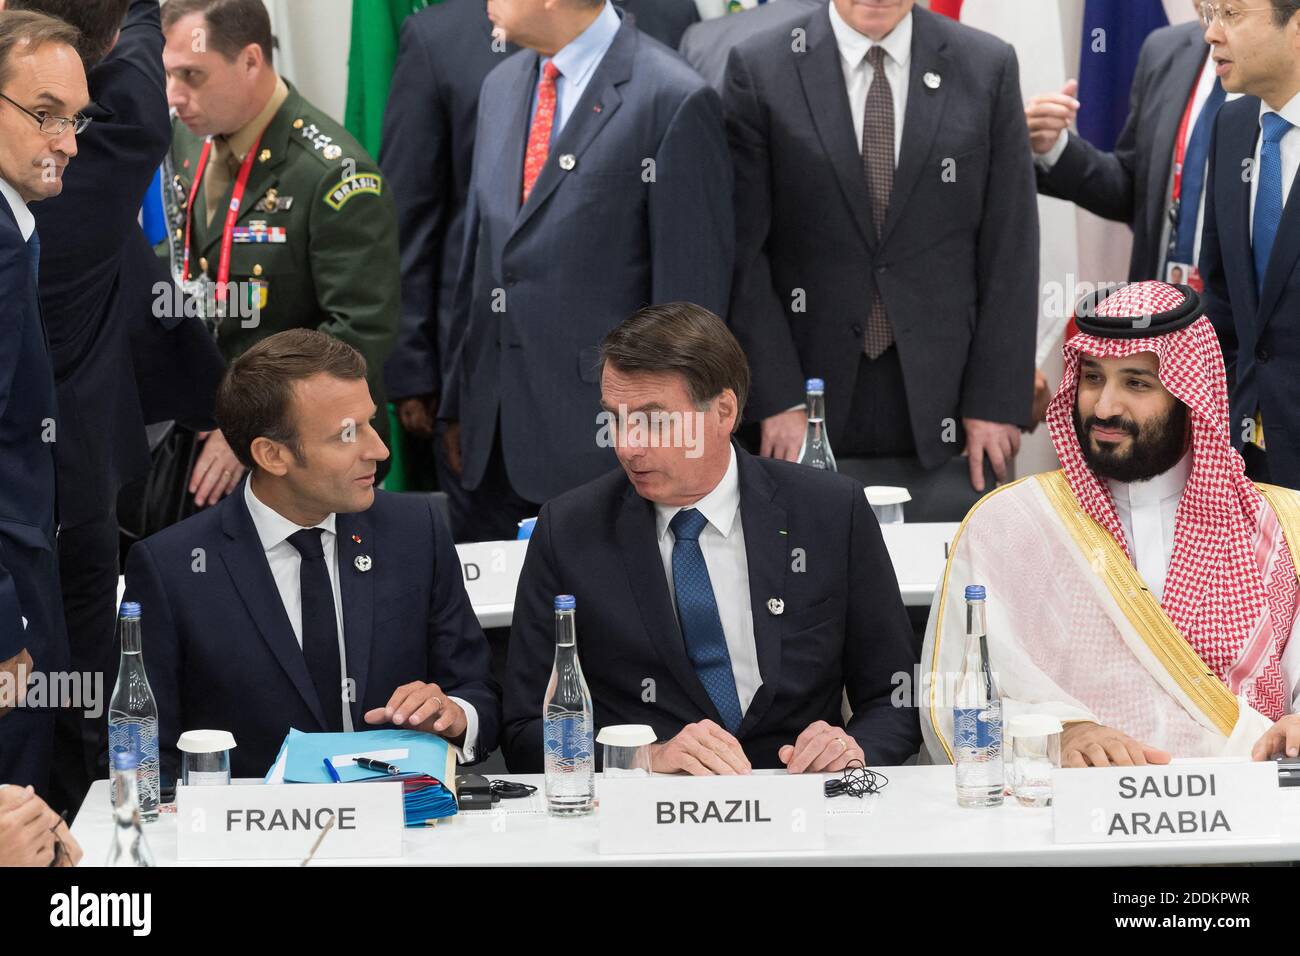 File photo dated June 28, 2019 of Emmanuel Macron, Jair Bolsonaro, Crown Prince Mohammed bin Salma during a meeting on world economy at the first day of the G20 Summit in Osaka, Japan. On his official Facebook account, the Brazilian president endorsed, Saturday, August 24, an offensive comment against the wife of Emmanuel Macron. Under one of his posts about the sending of armed forces to fight fires, Bolsonaro reacted to a comment mocking the physique of the French First Lady - appearing on a disadvantageous photo - by comparing it to that of Michelle Bolsonaro (37), radiant on the day of the Stock Photo